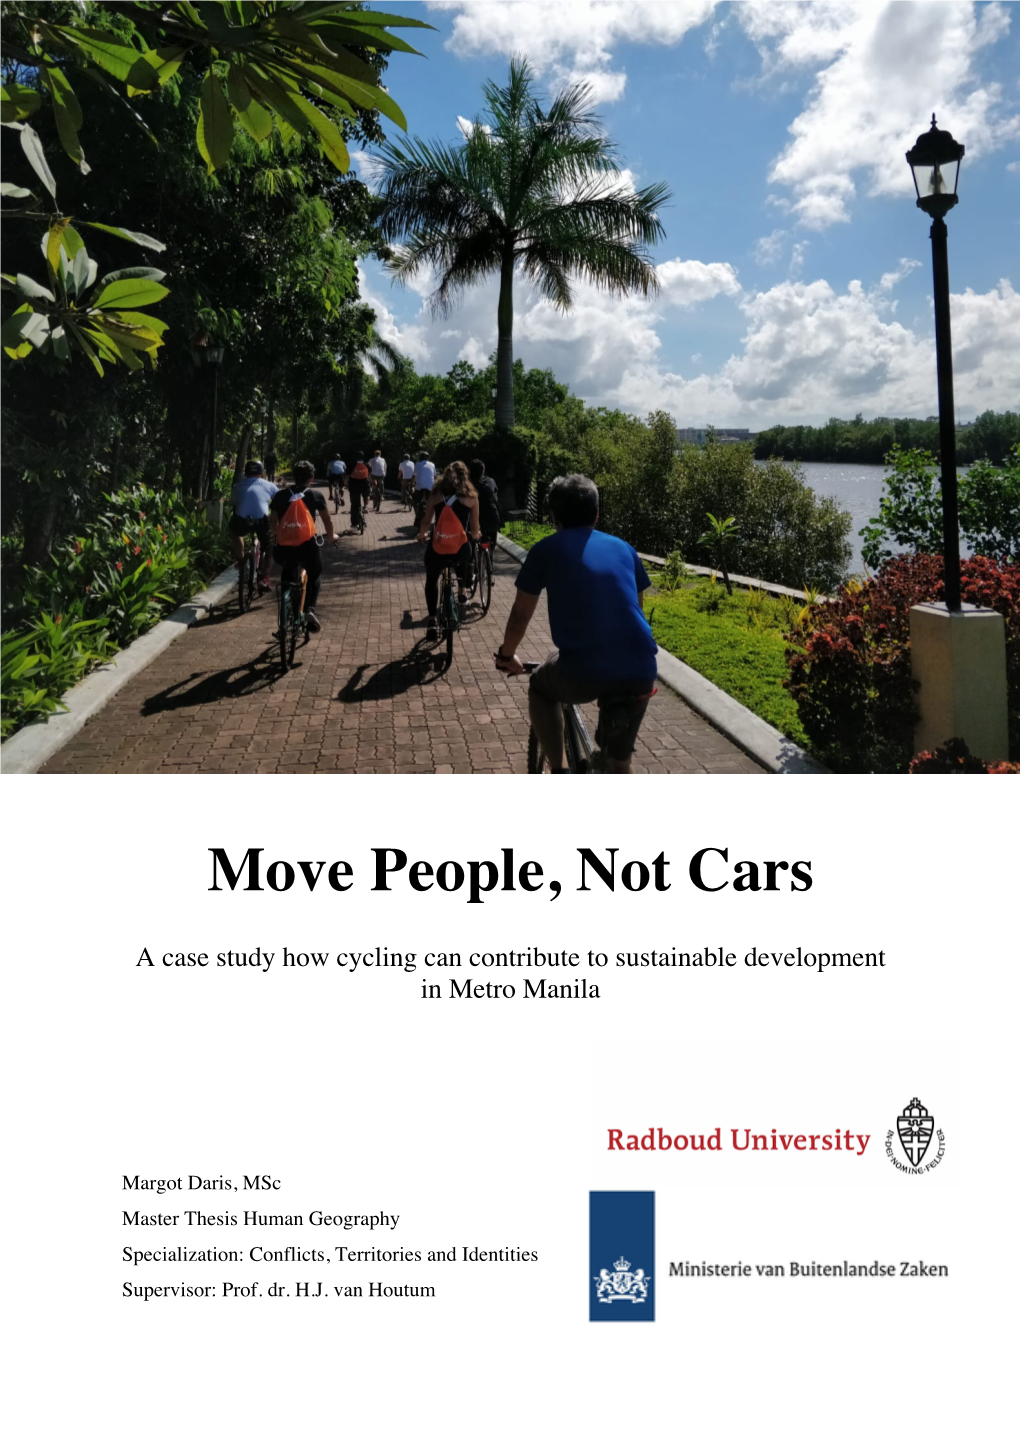 Move People, Not Cars